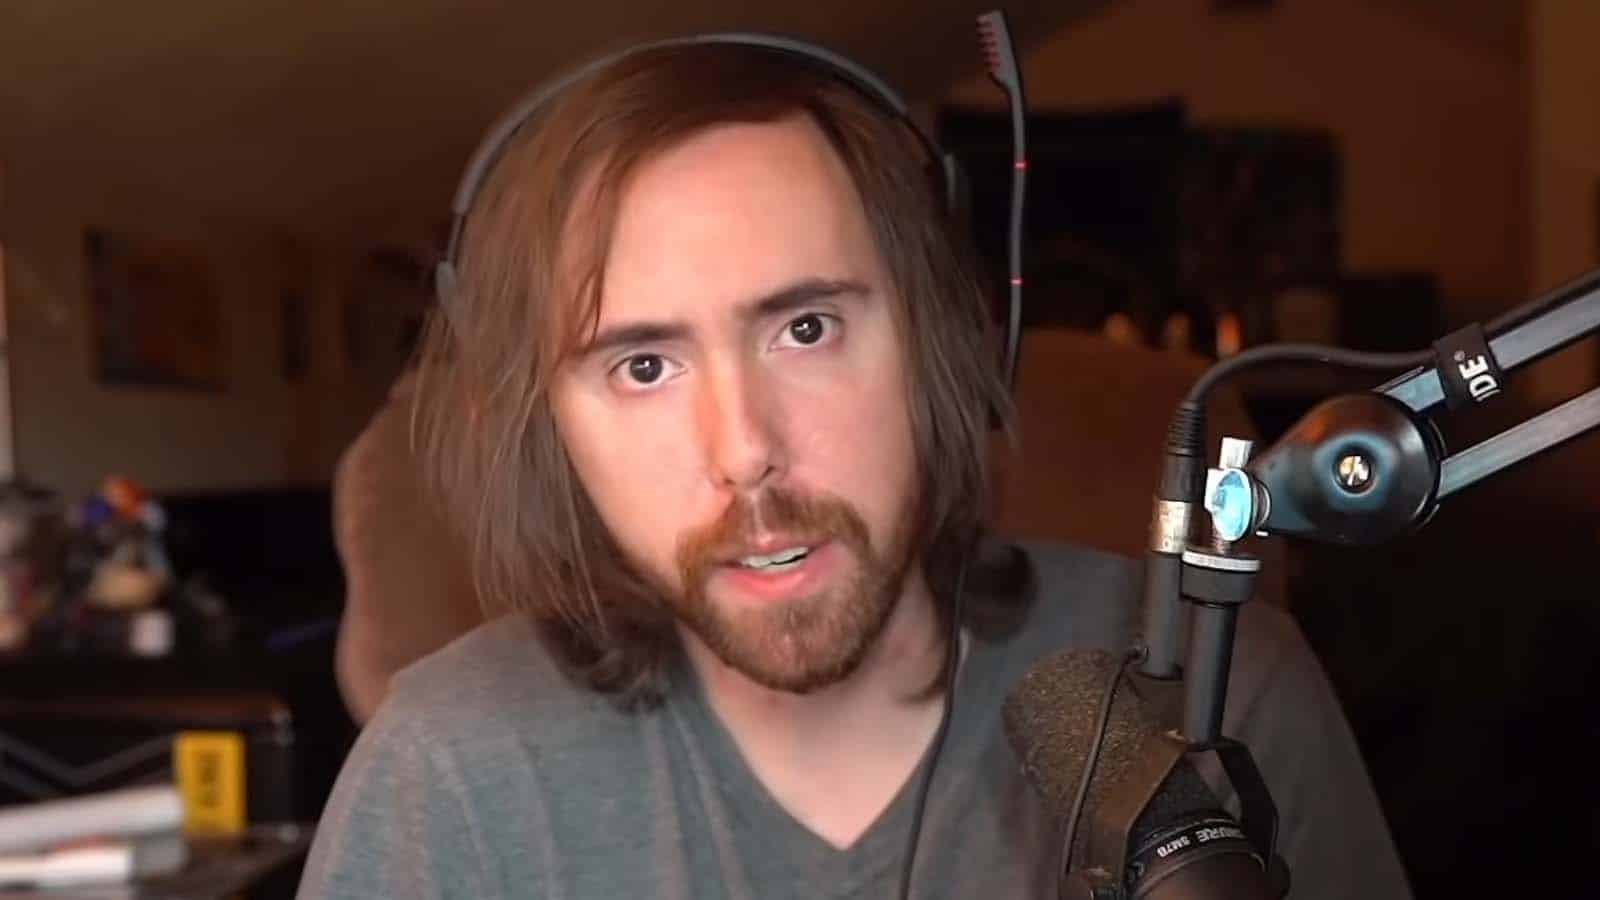 Asmongold has no intention of “ever really quitting” Twitch career ...